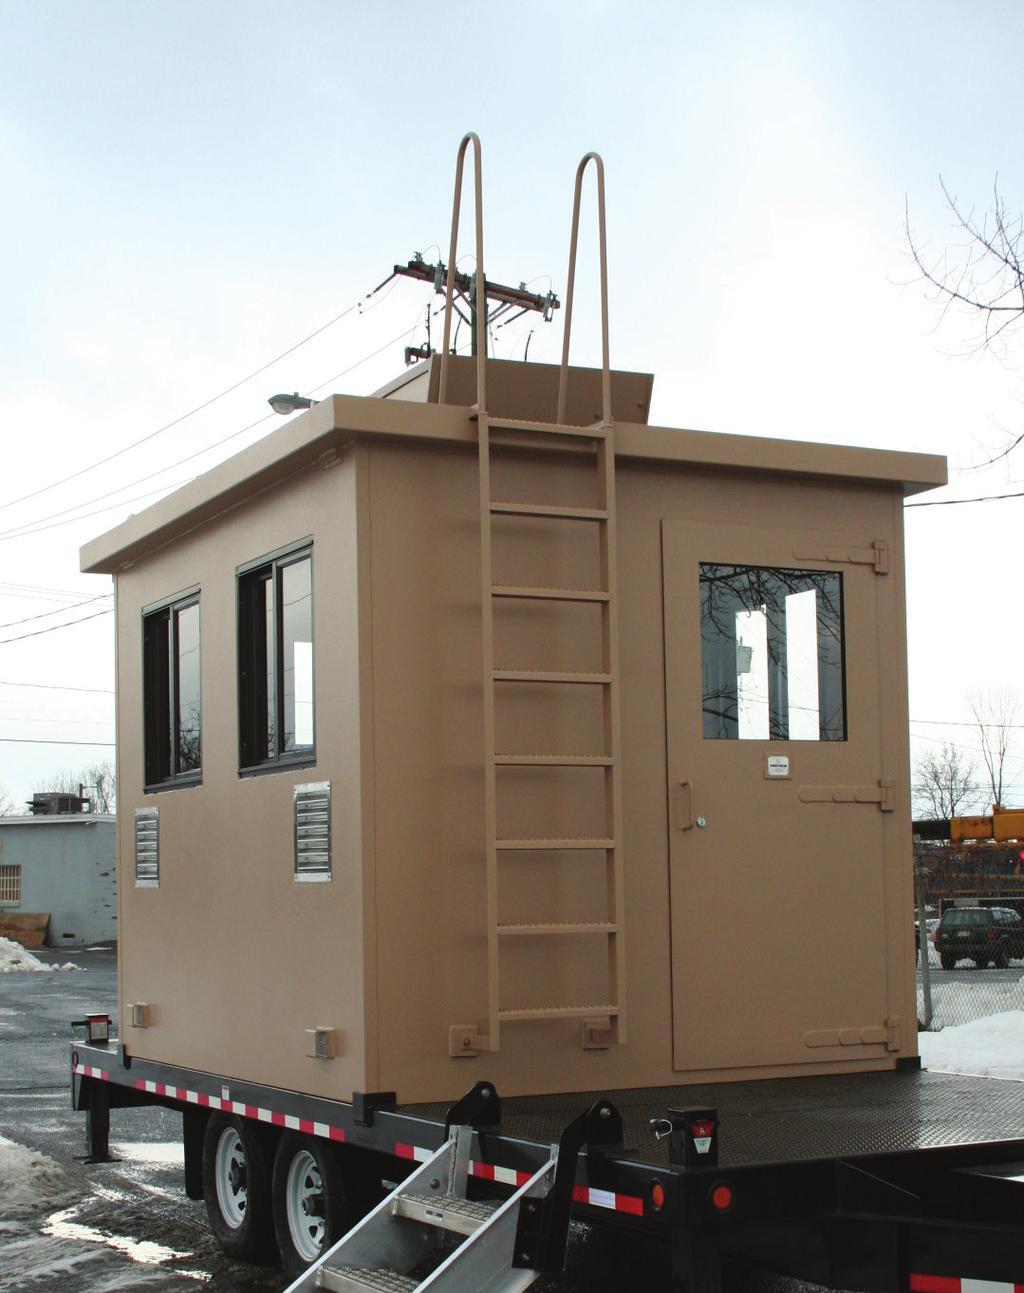 BULLET & BLAST RESISTANT GUARD BOOTHS TRAILER MOUNTED DEFENSIVE FIGHTING POSITIONS & BALLISTIC BARRIERS PROTECH Trailer Mounted Guard Booths